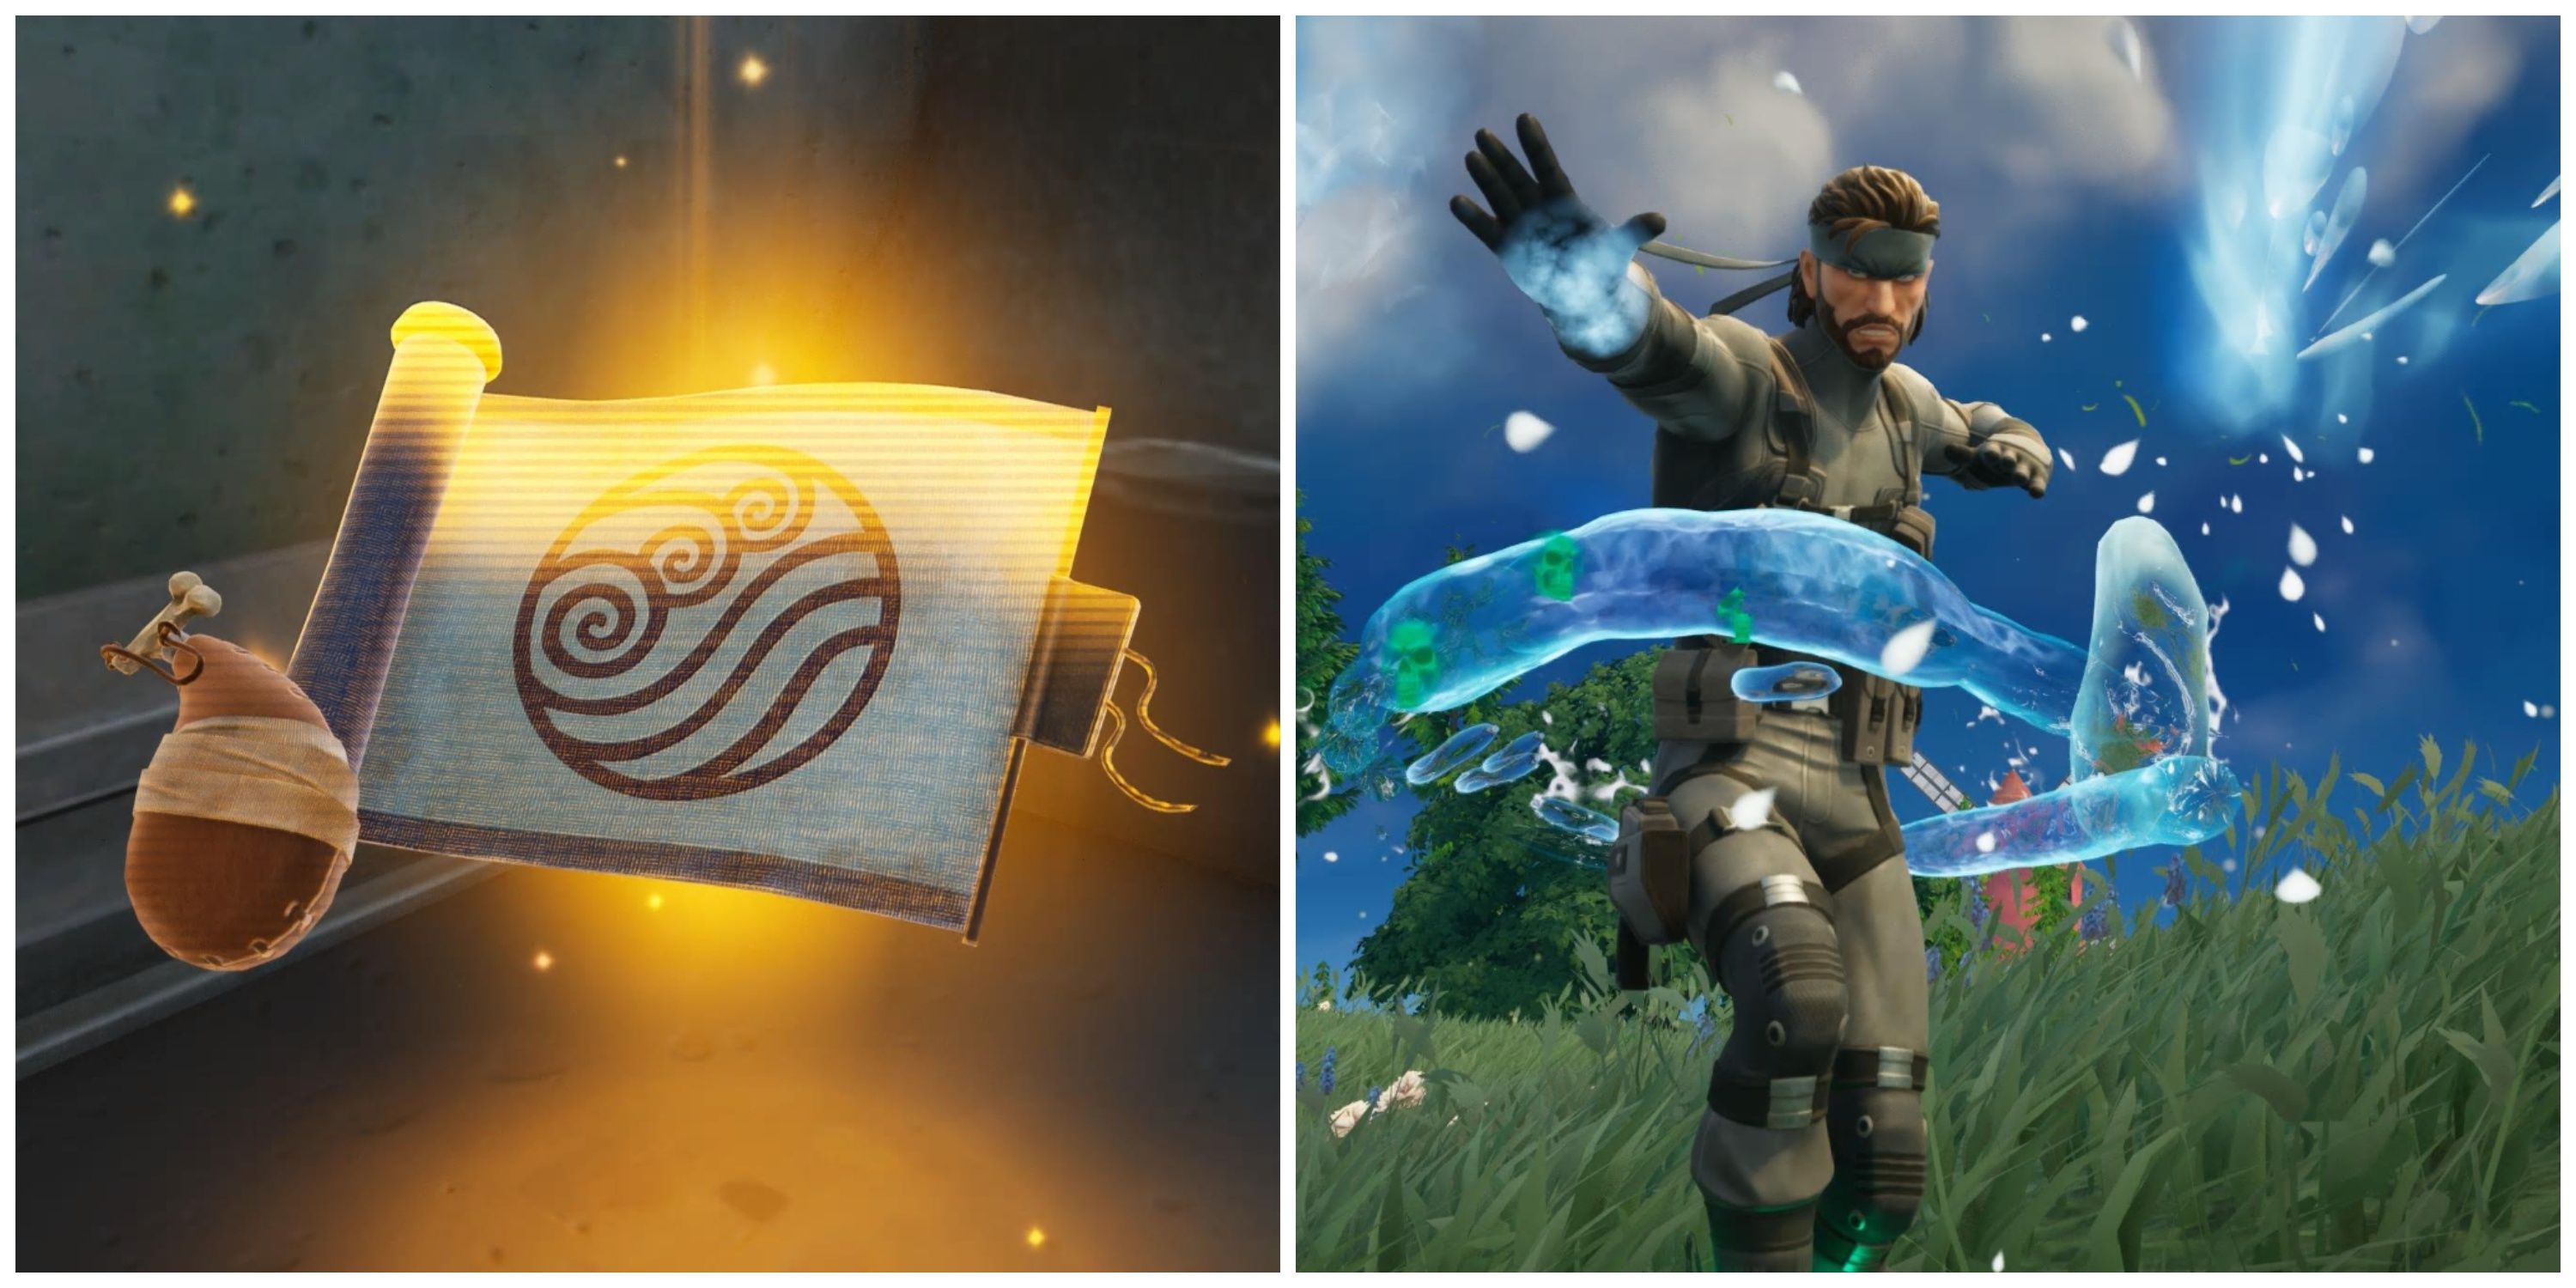 waterbending mythic used by solid snake